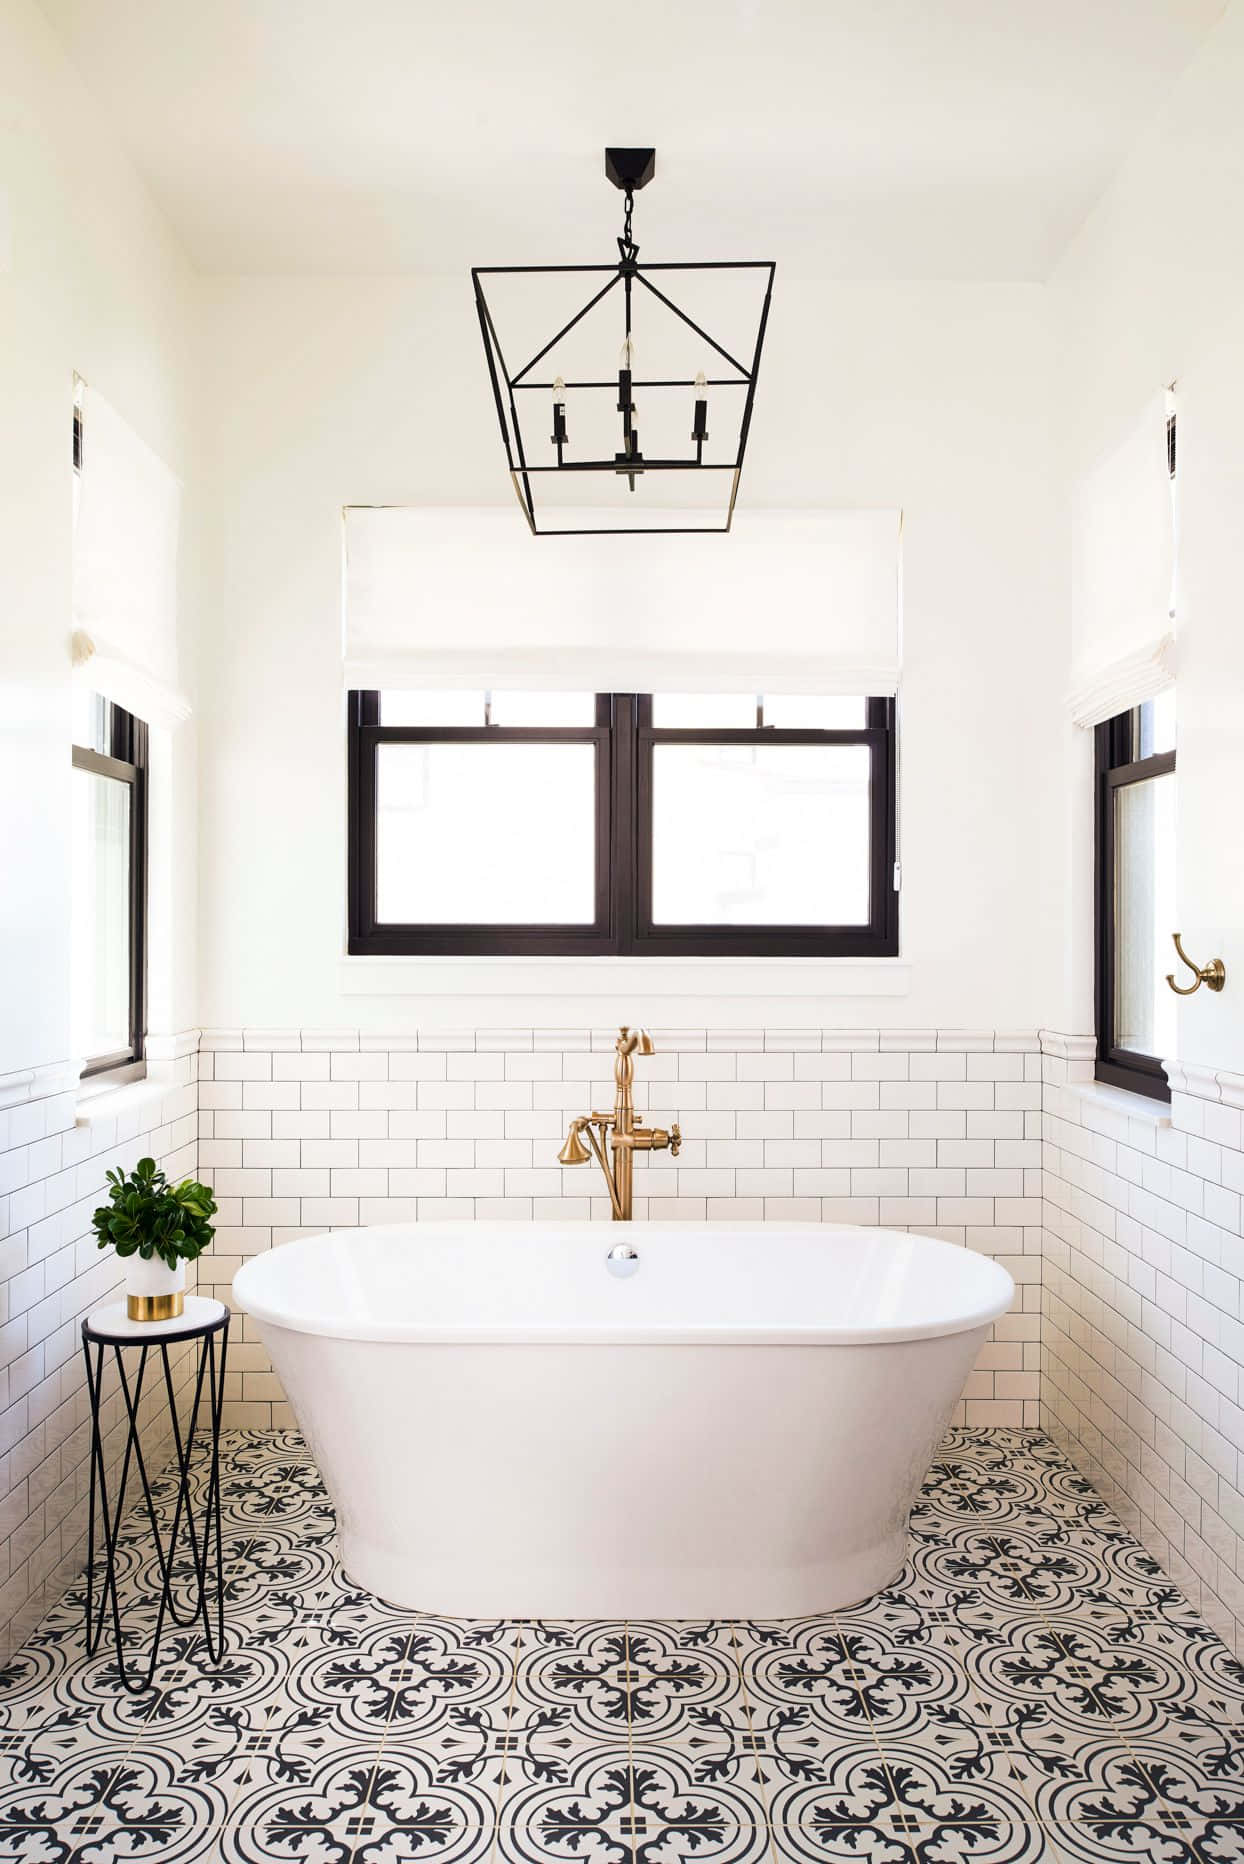 A Bathroom With Black And White Tiled Floors